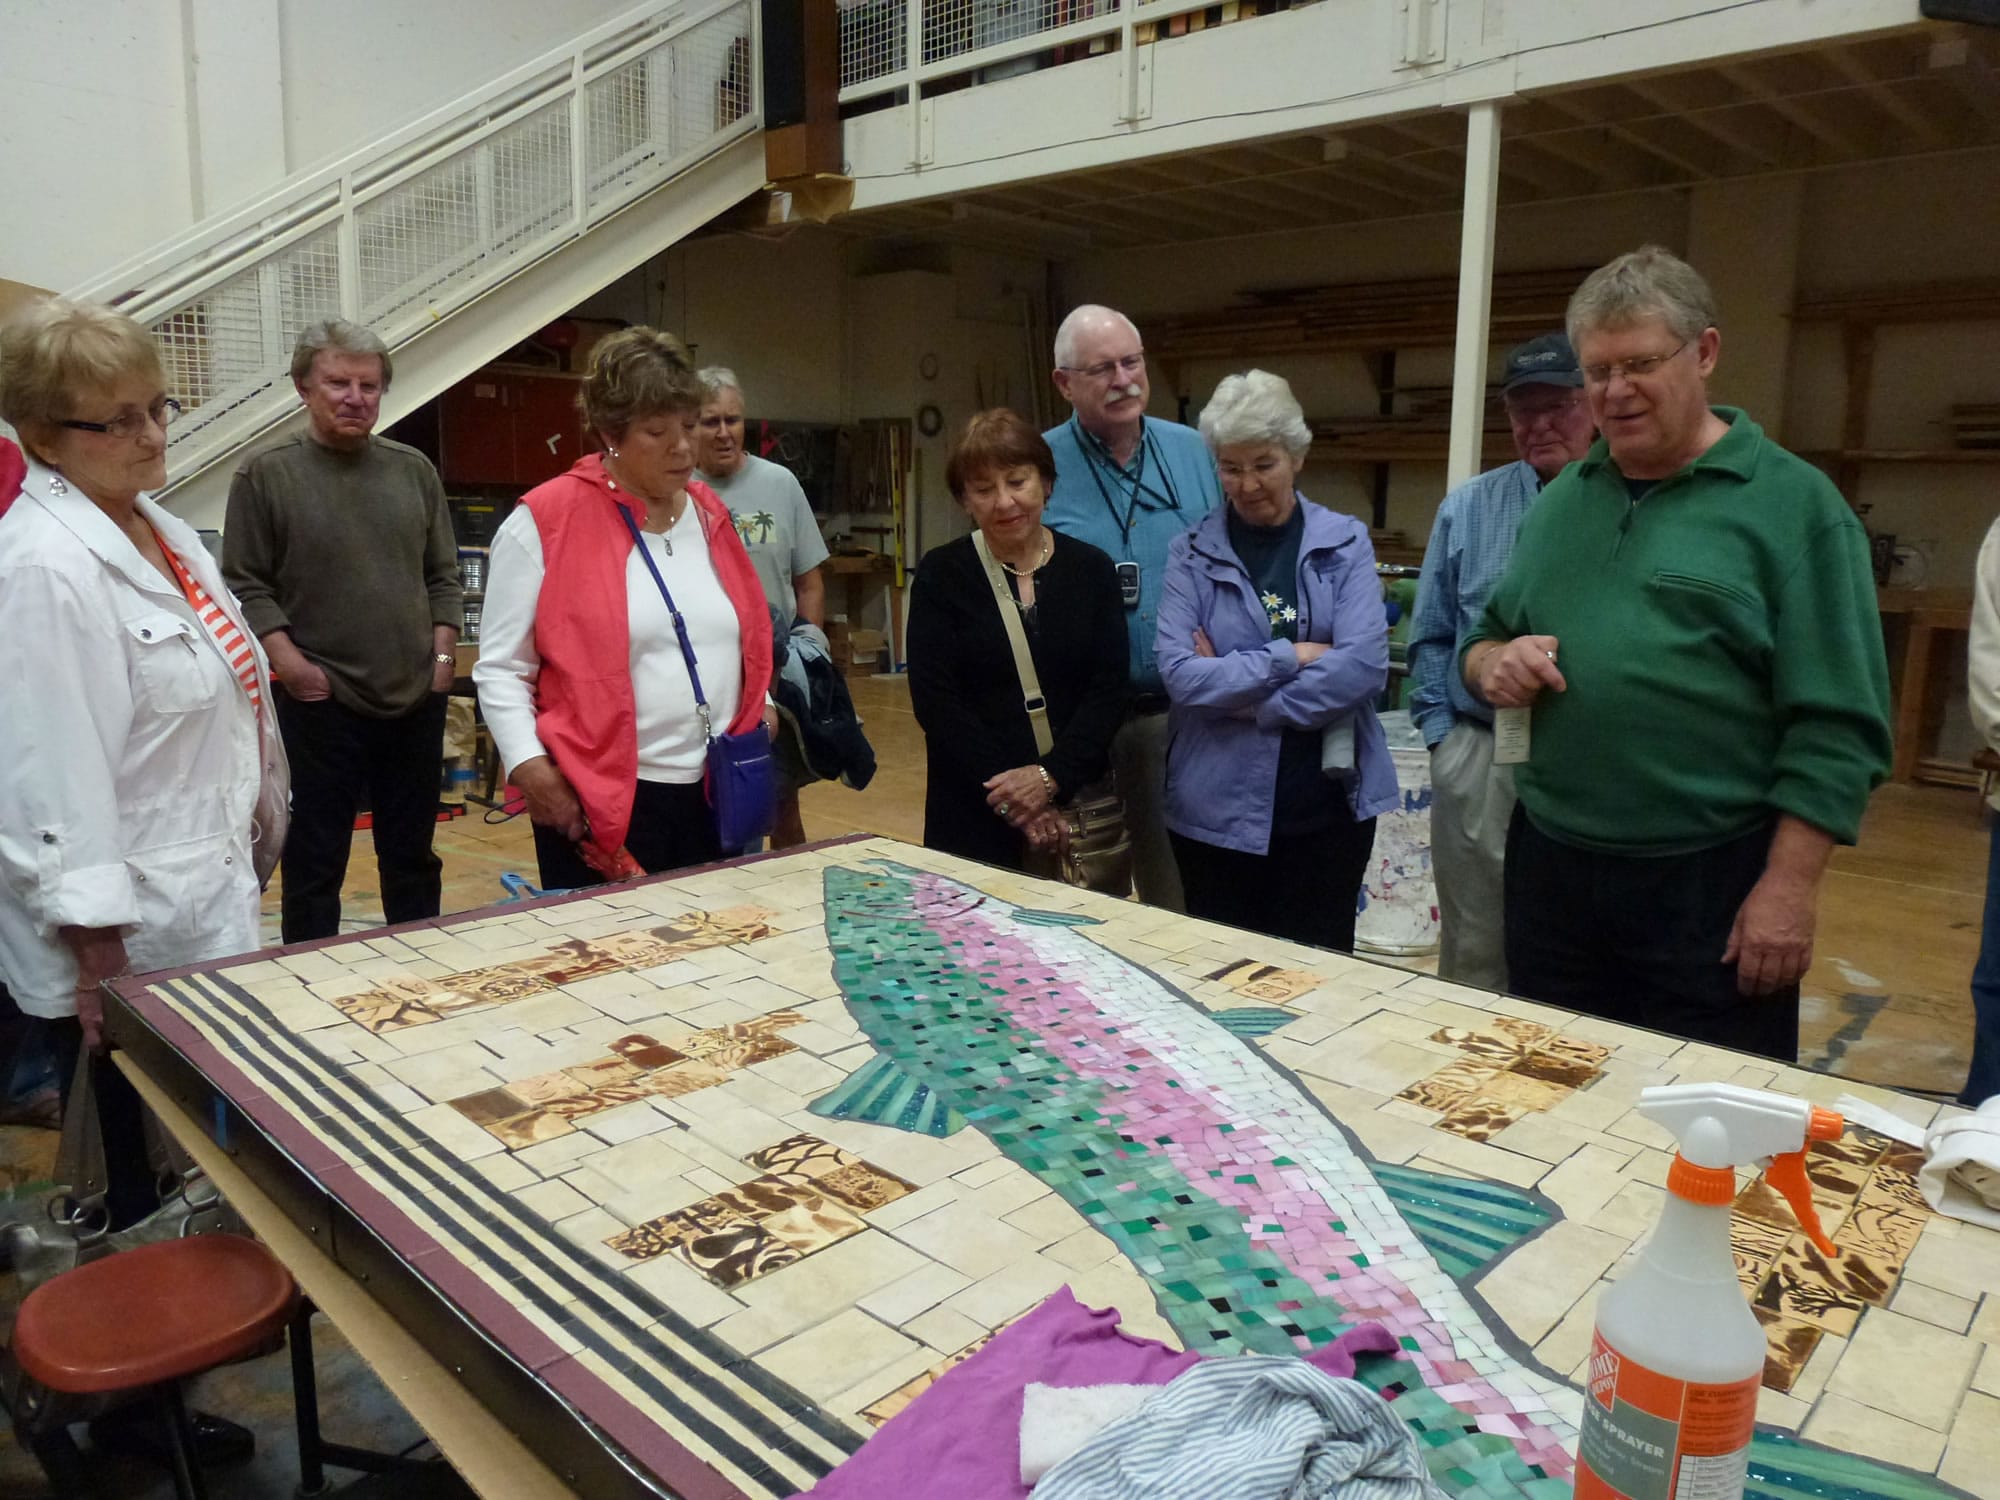 Shumway: Graduates of the Fort Vancouver High School class of '58 admire a mosaic headed for the window panels of the Vancouver School of Arts and Academics.